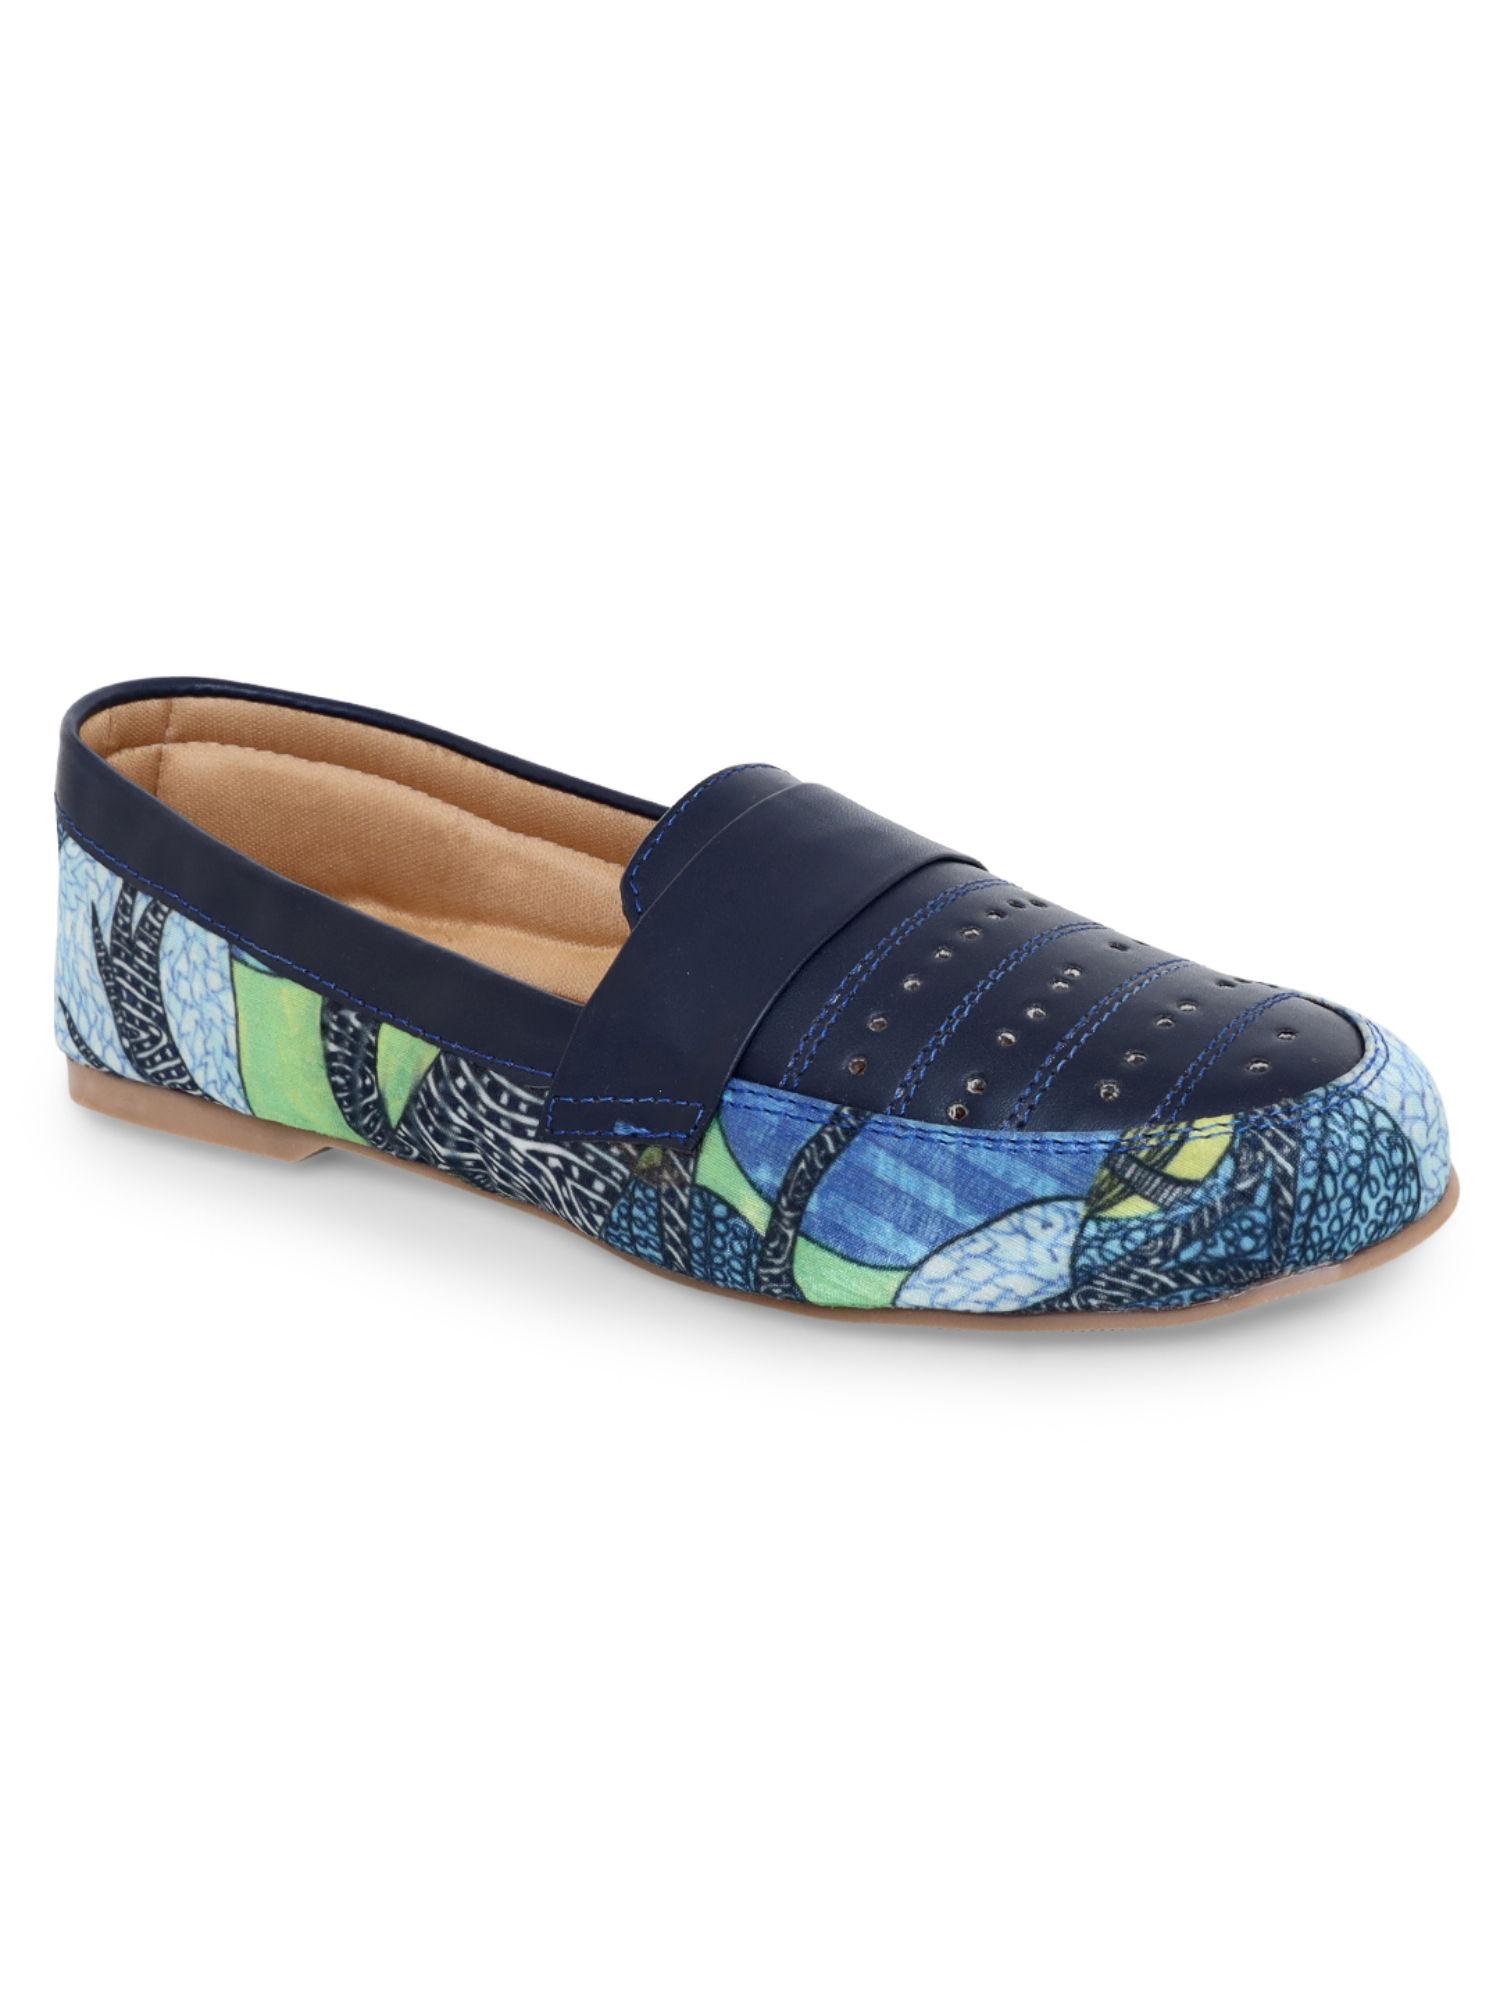 printed multi color loafers